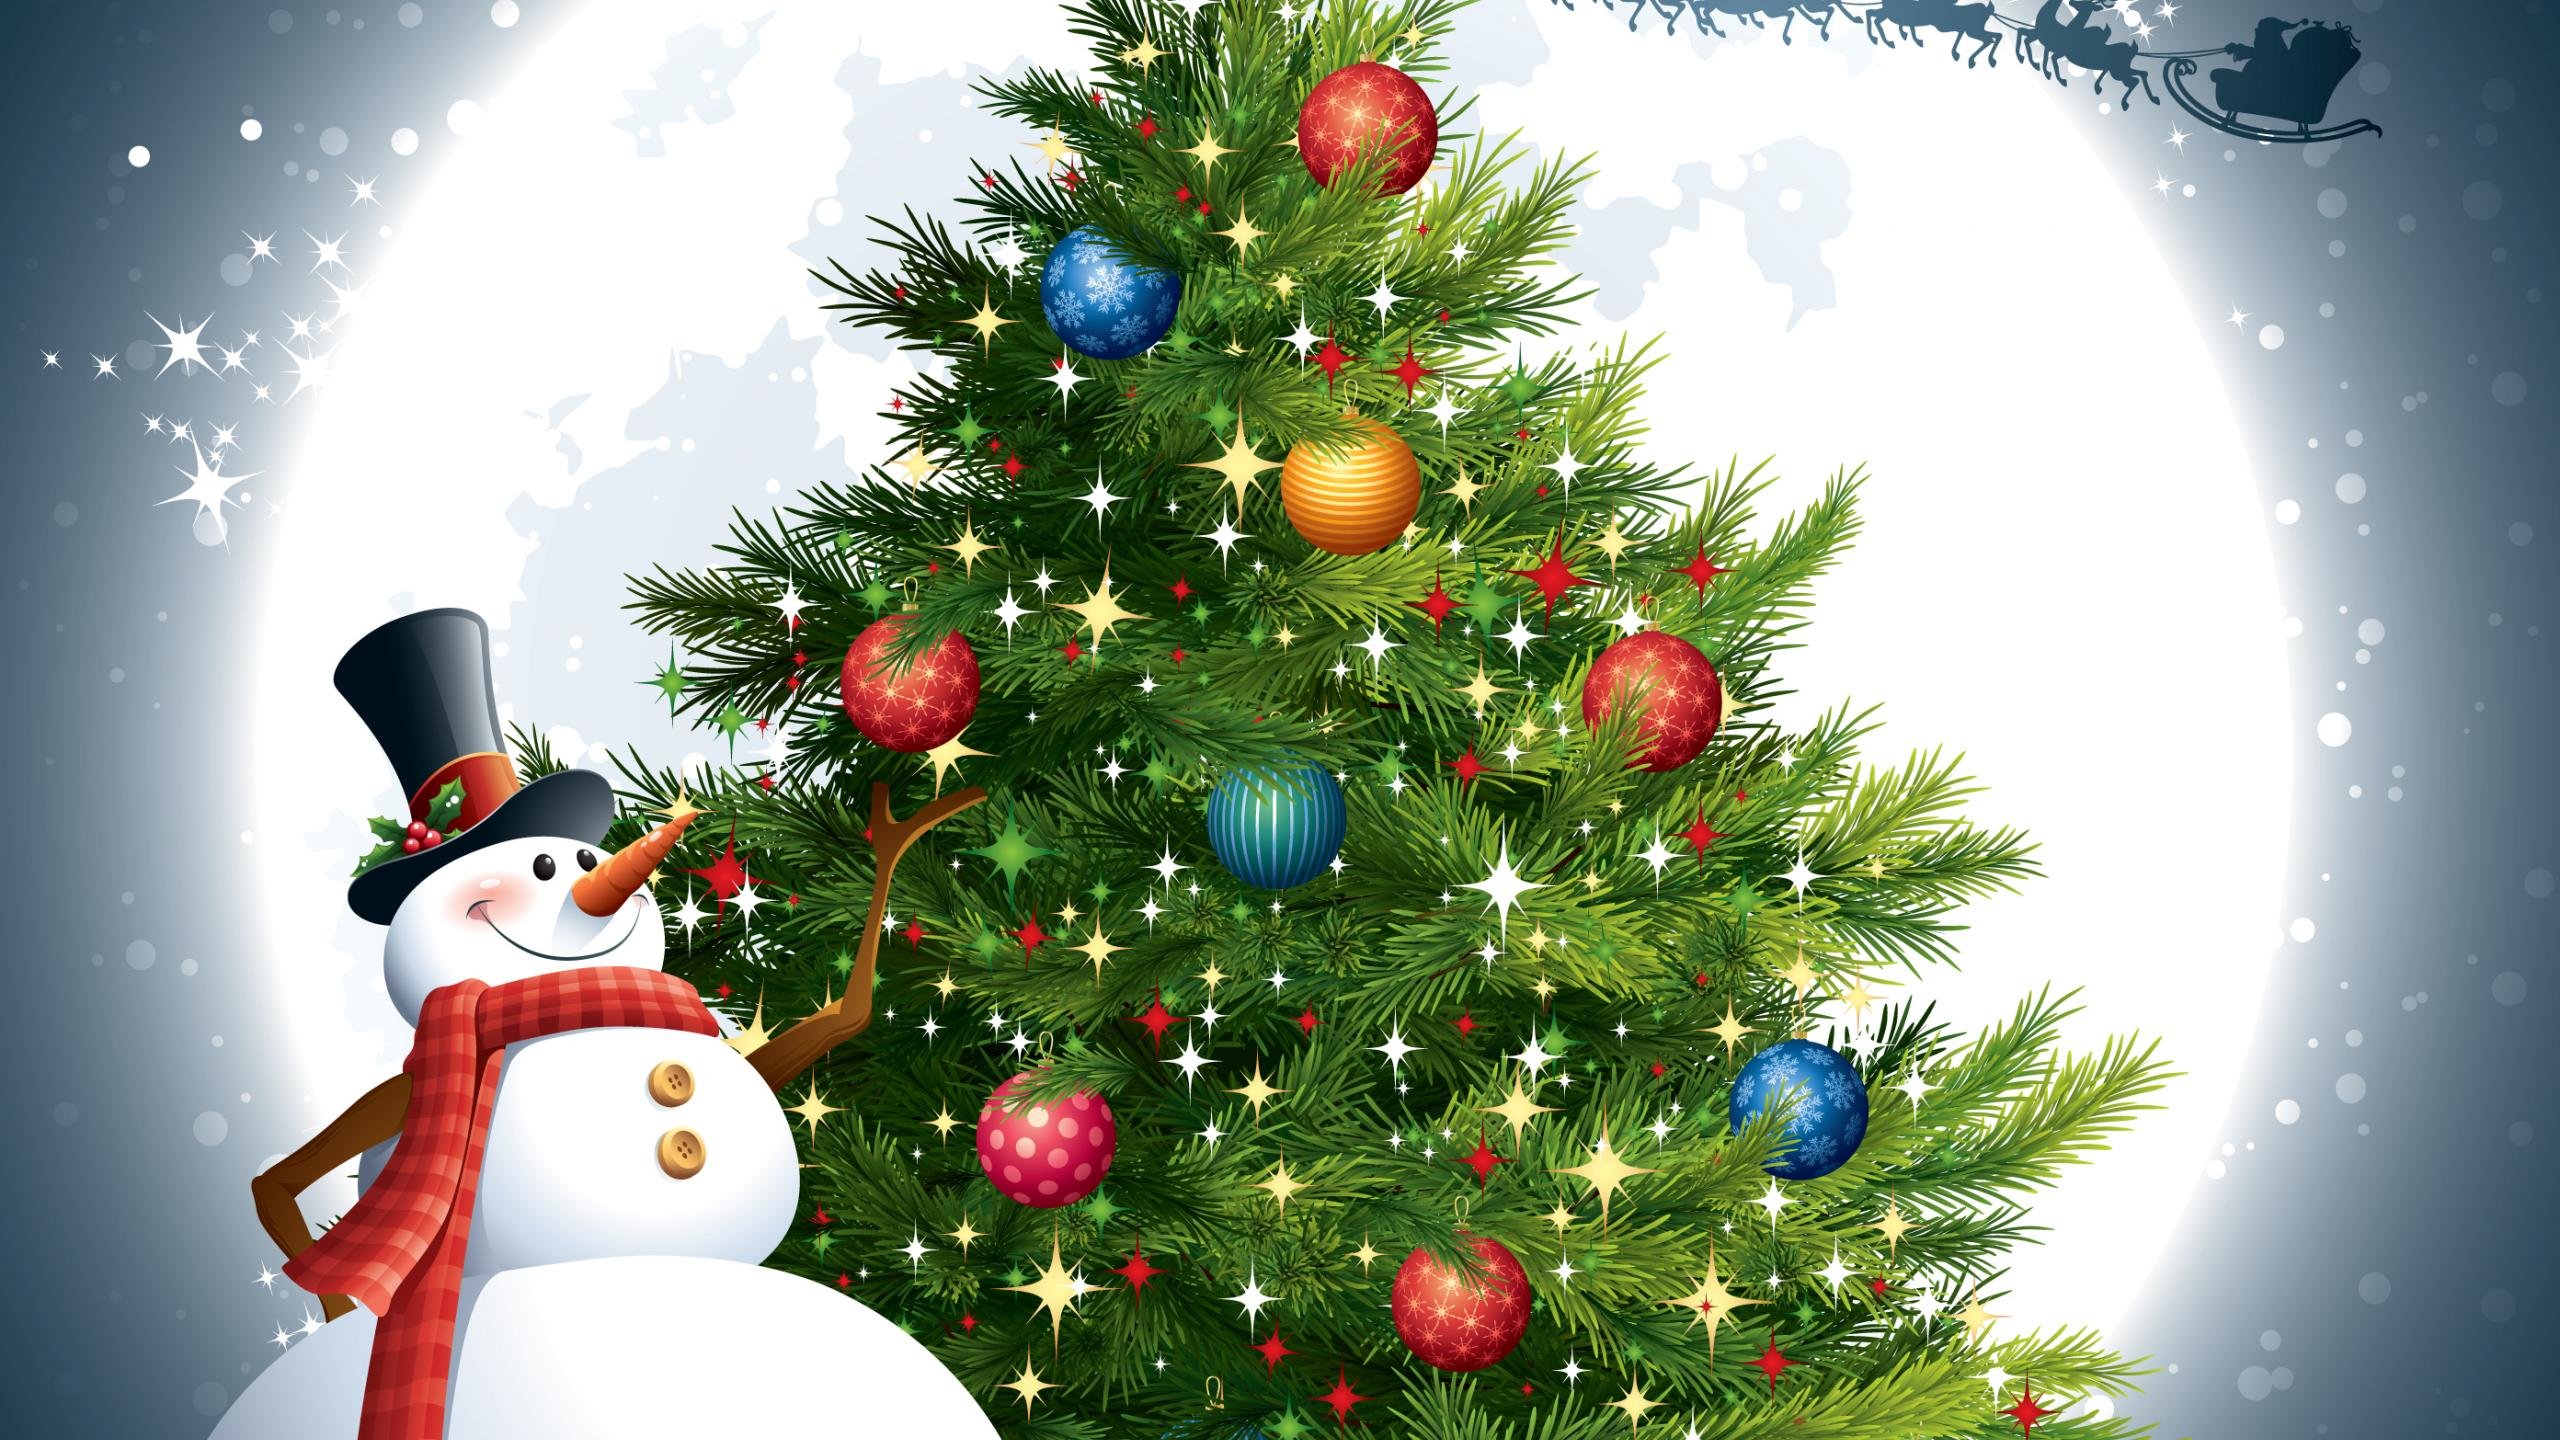 Free photo Rendering of Christmas tree with snowman